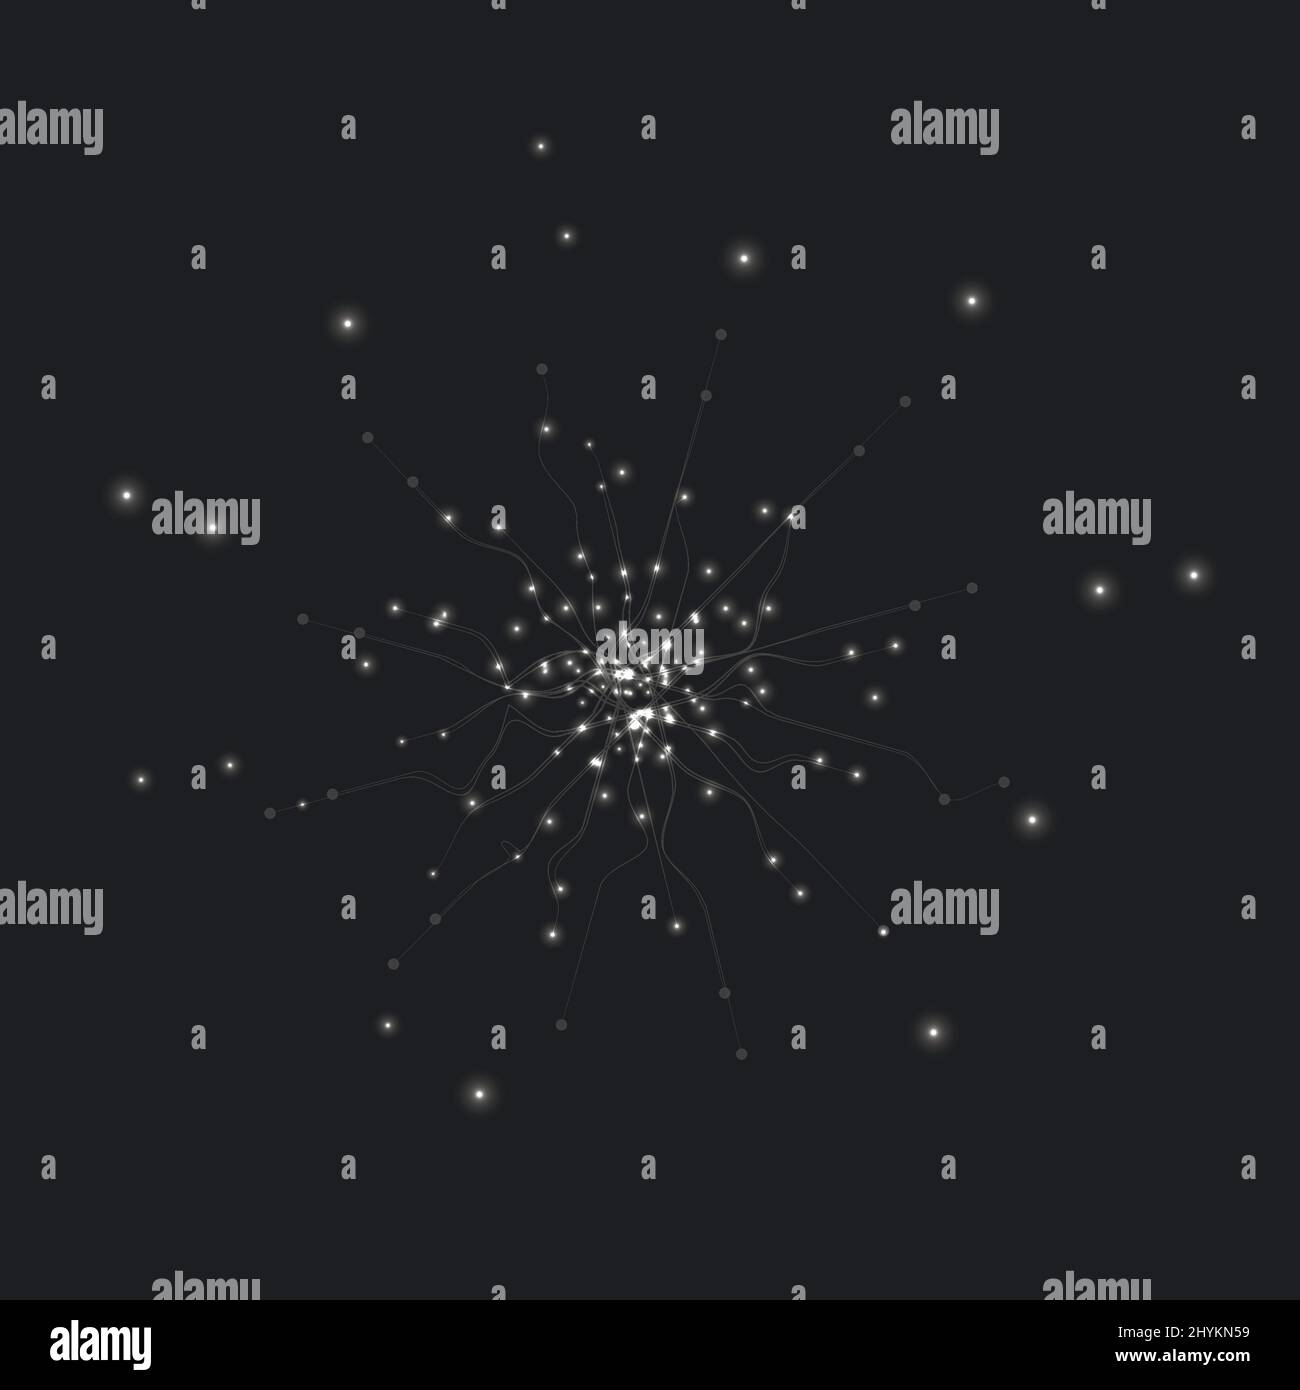 Space background with bright stars. Vector galaxy illustration Stock Vector